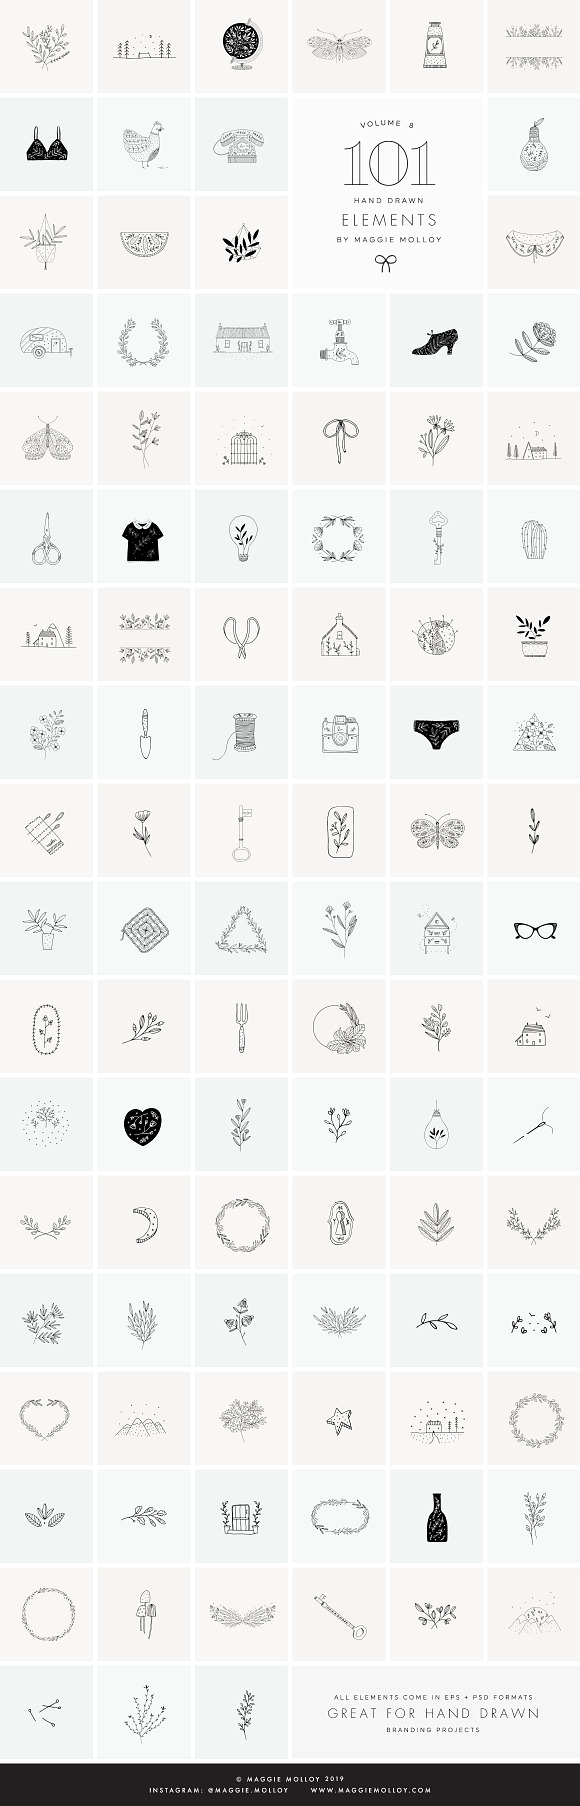 404 Hand Drawn Logo Elements Vol 5-8 in Illustrations - product preview 1